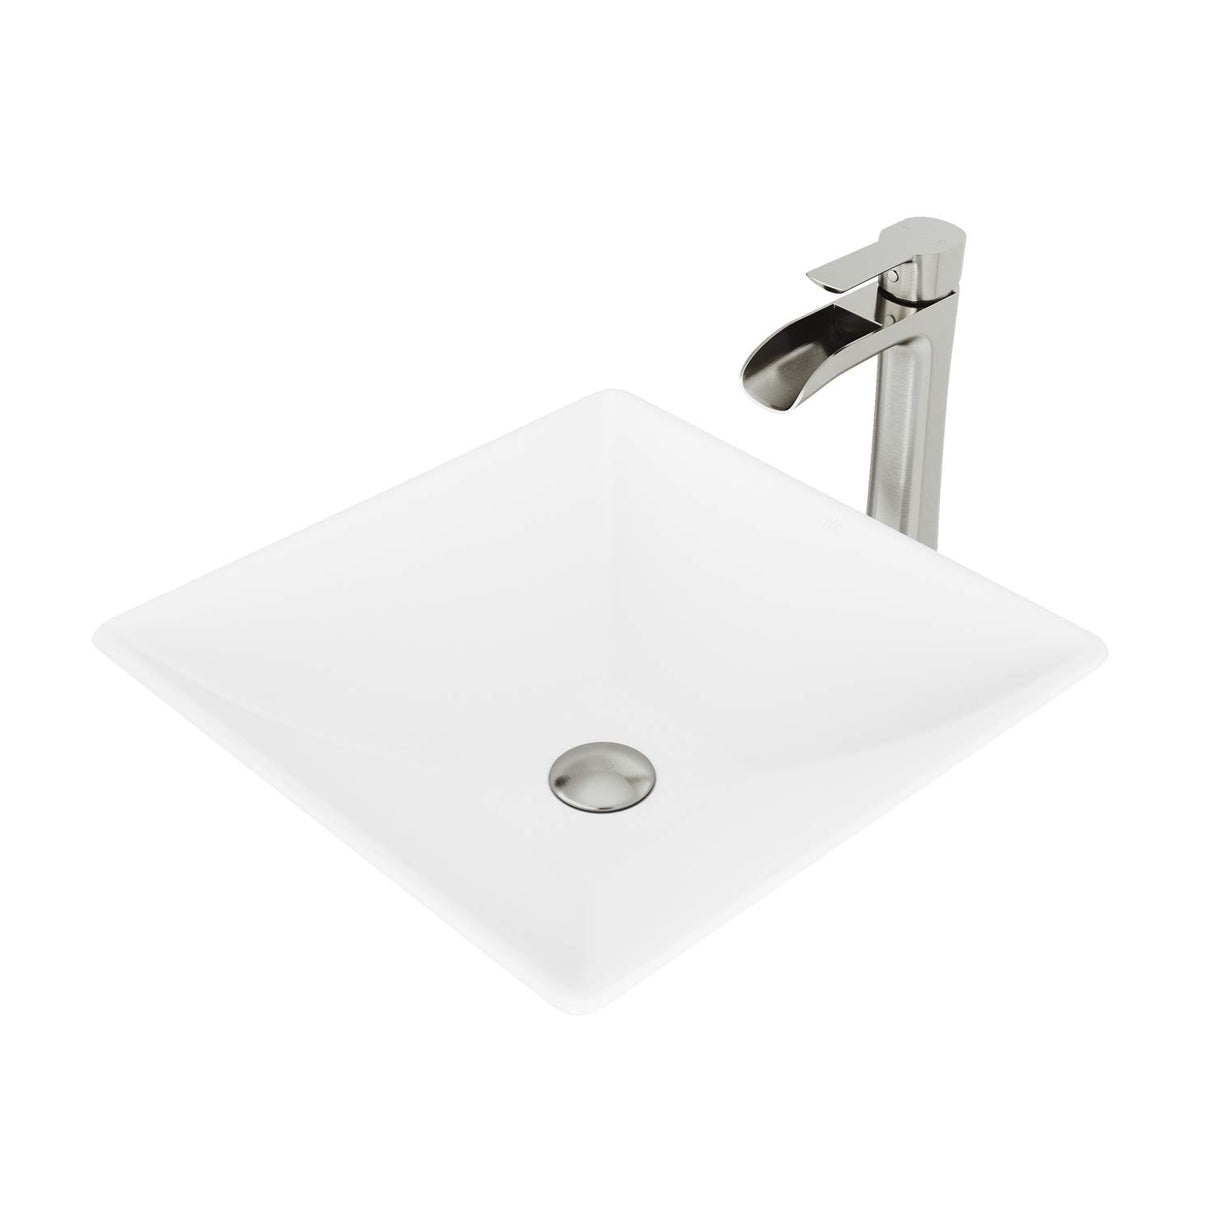 VIGO VGT1086BN 16.0" L -16.0" W -10.5" H Handmade Countertop Matte Stone Square Vessel Bathroom Sink Set in Matte White Finish with Brushed Nickel Single-Handle Waterfall Faucet and Pop Up Drain